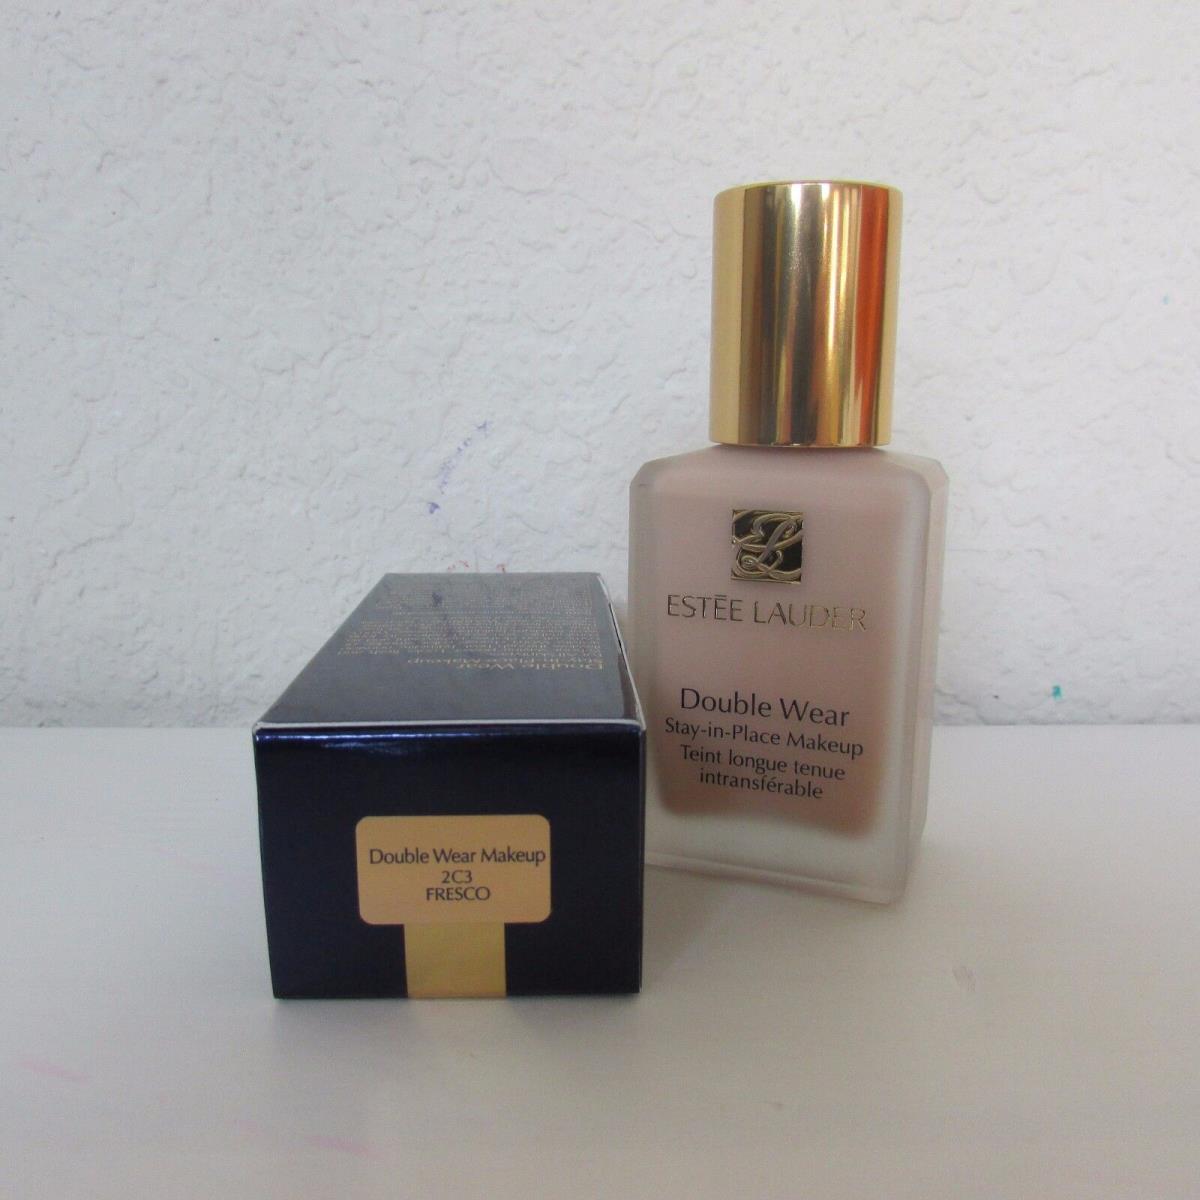 Estee Lauder Double Wear Stay-in-place Makeup Choose Your Shade 1.0 Oz/30 ml 2C3 Fresco